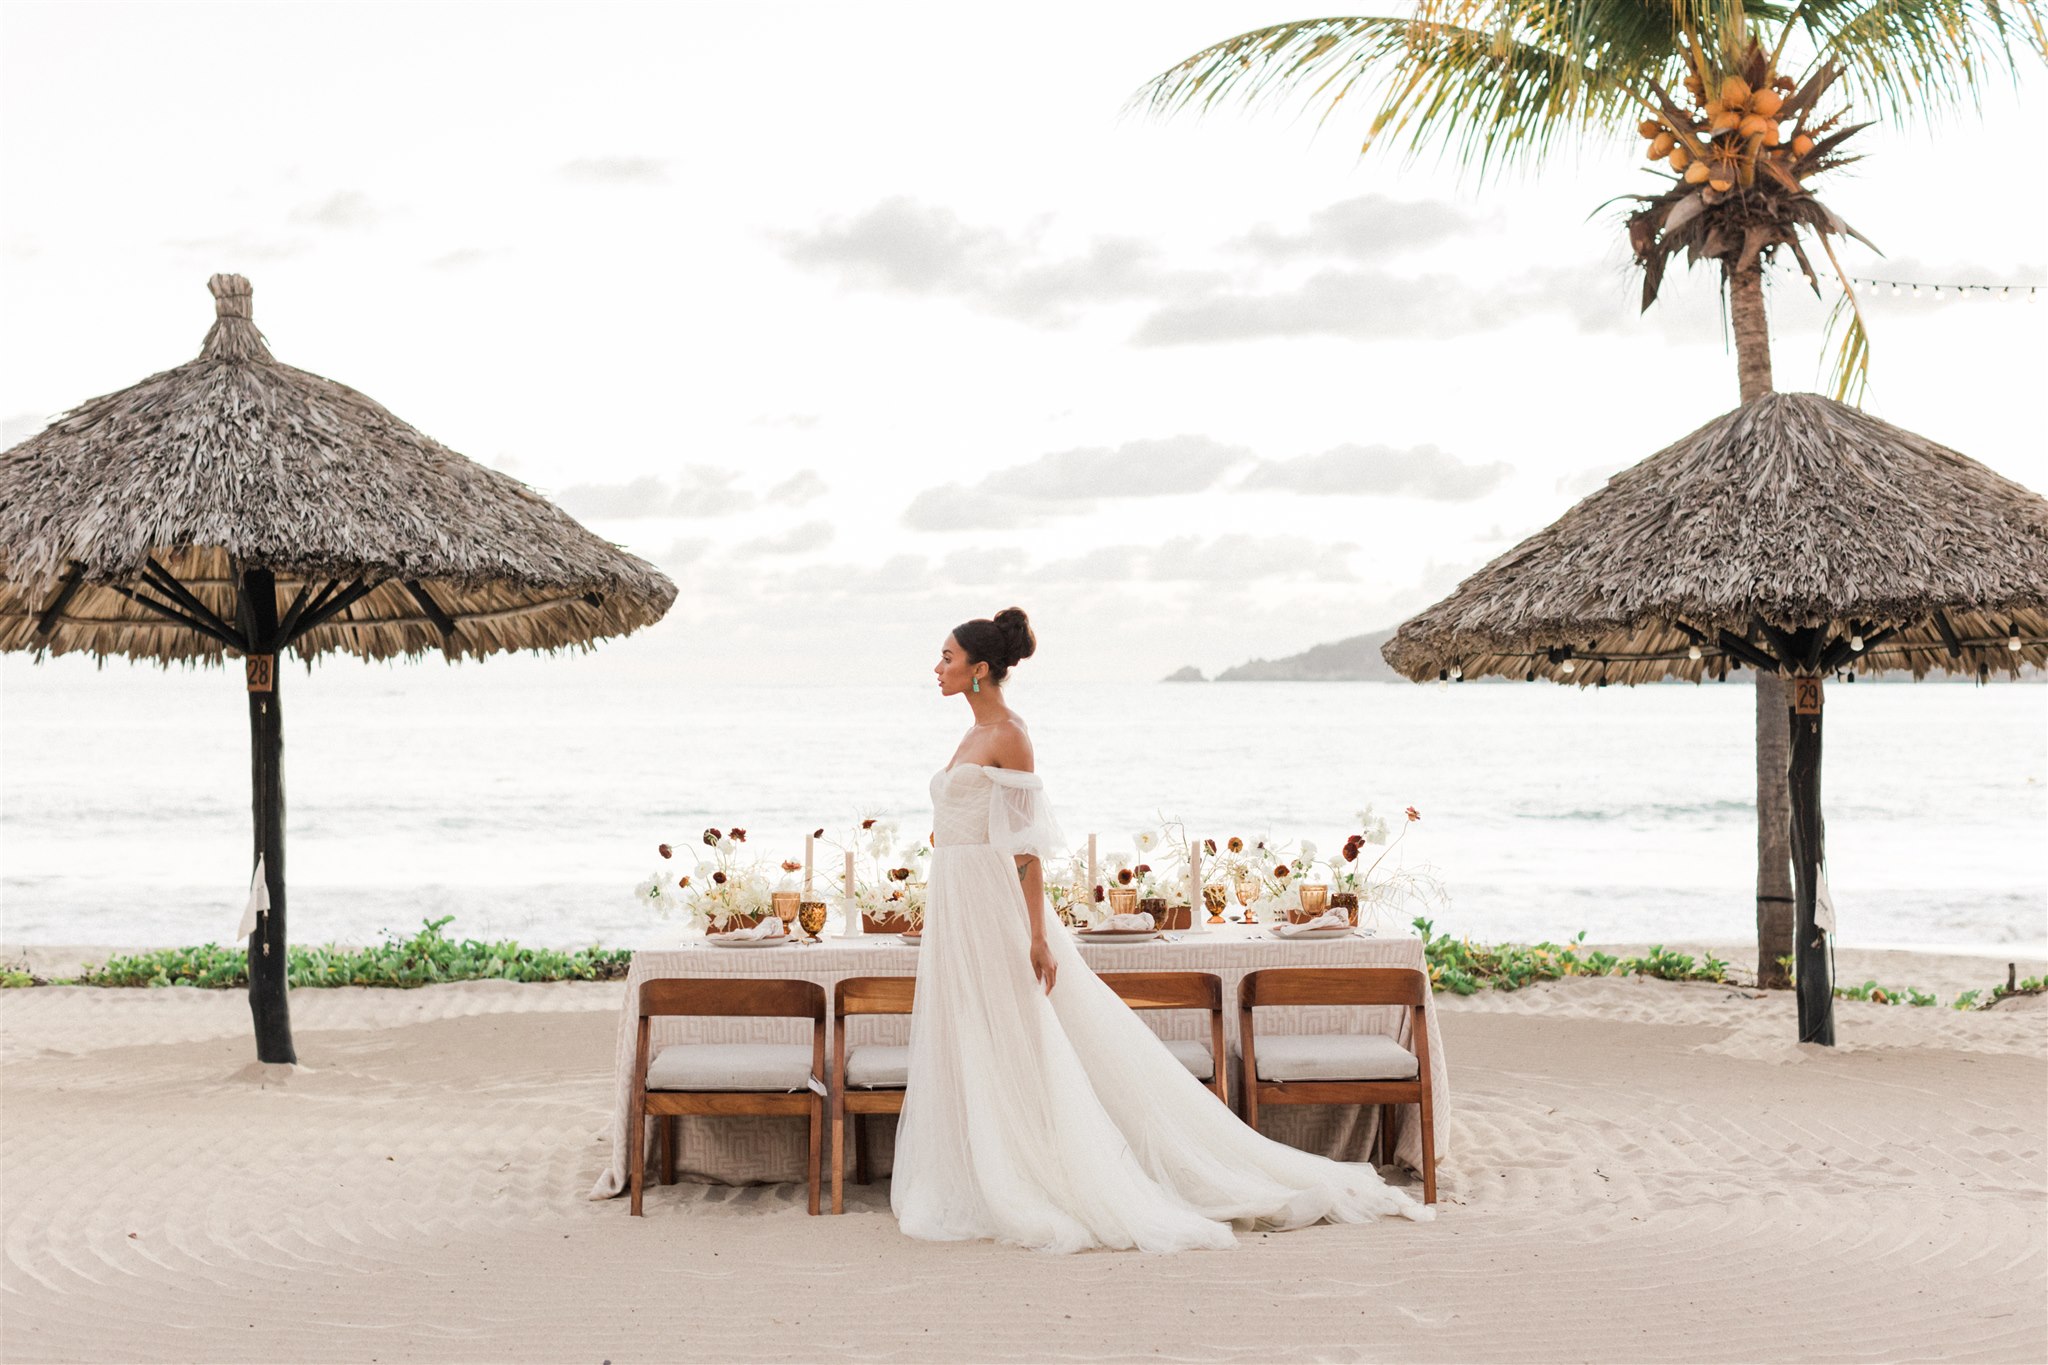 Destination Wedding Styled Shoots: What They Are and Why We Do Them